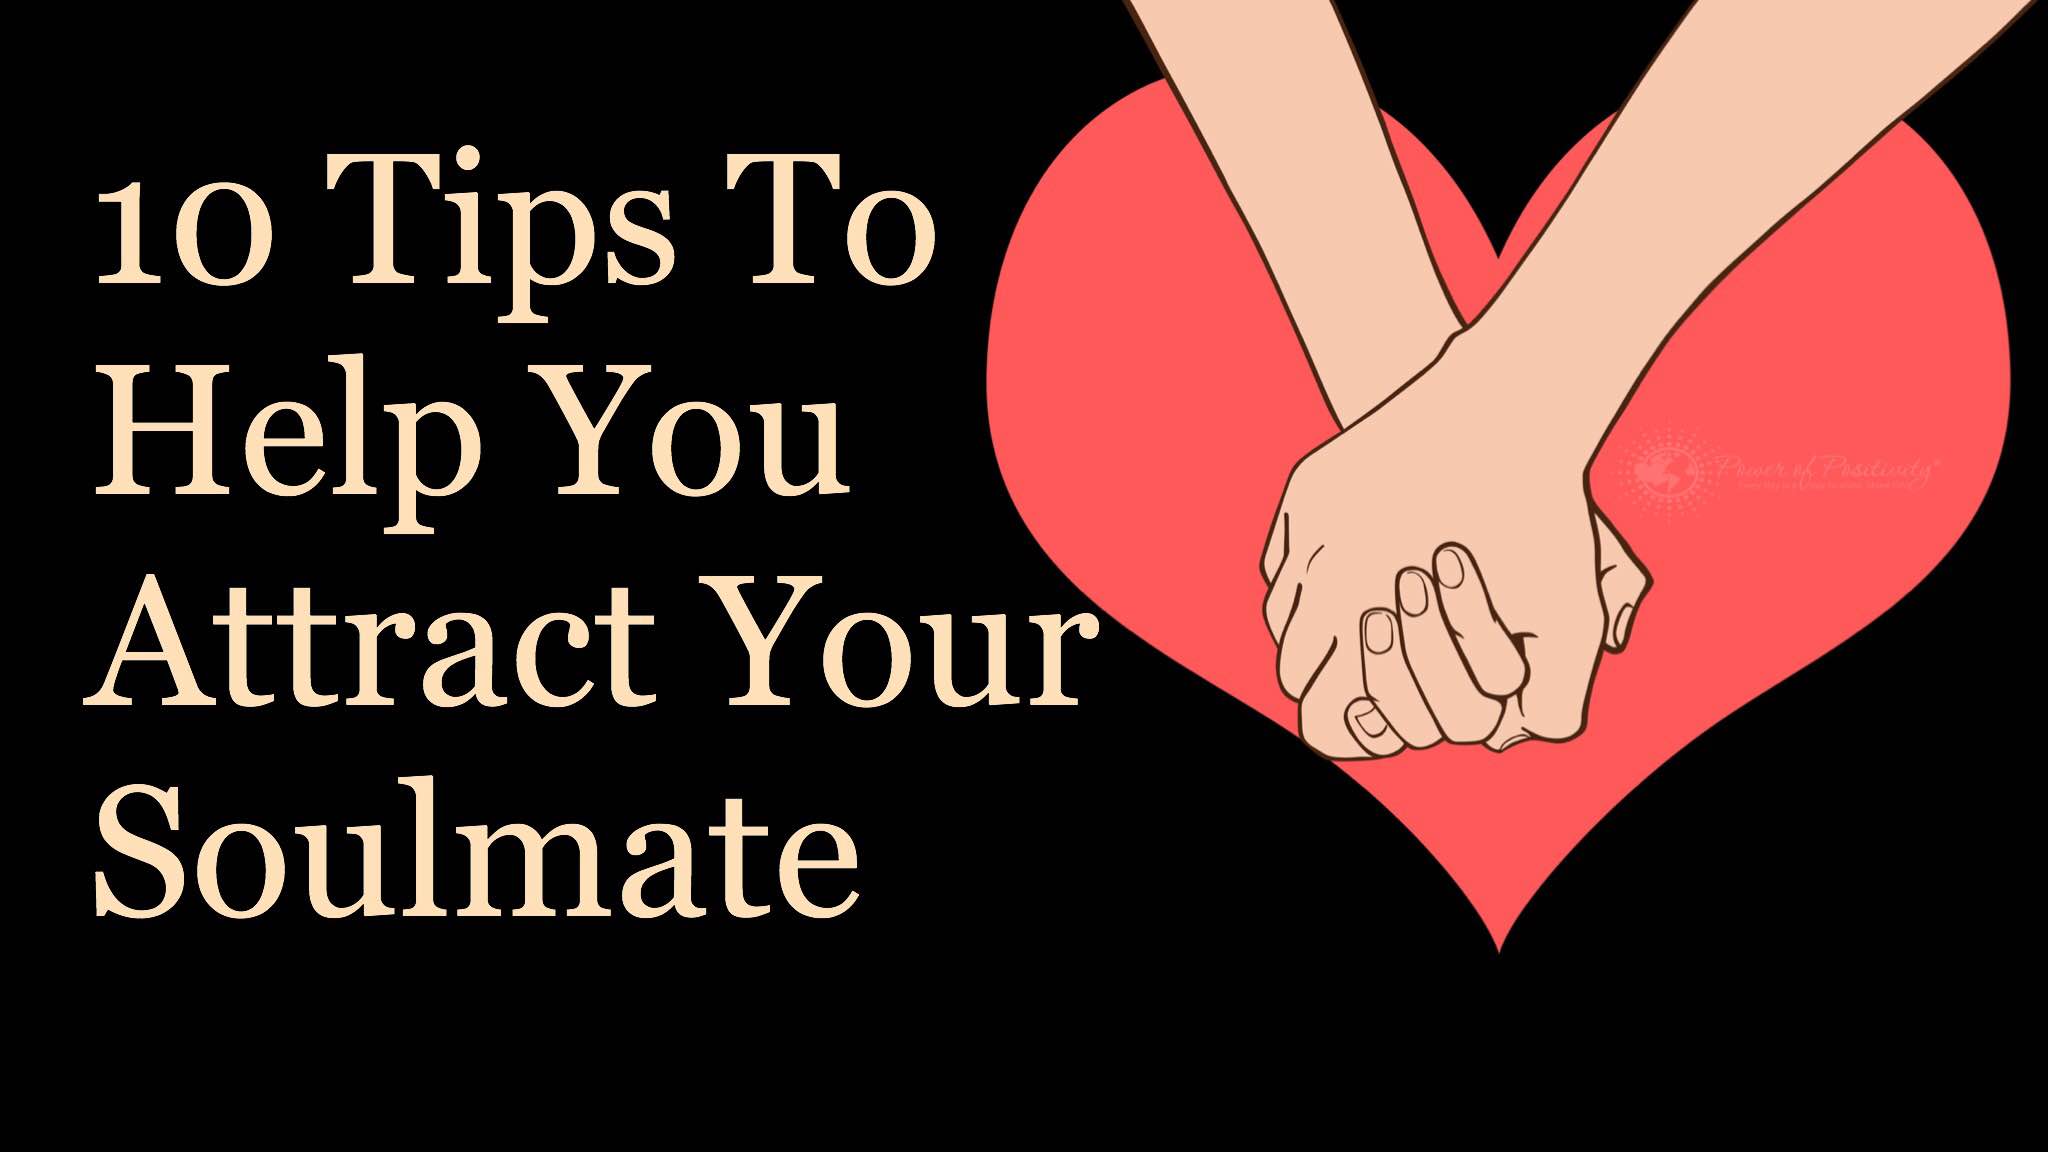 Herhaal Dynamiek bloed 10 Tips to Help You Attract Your Soulmate | Power of Positivity